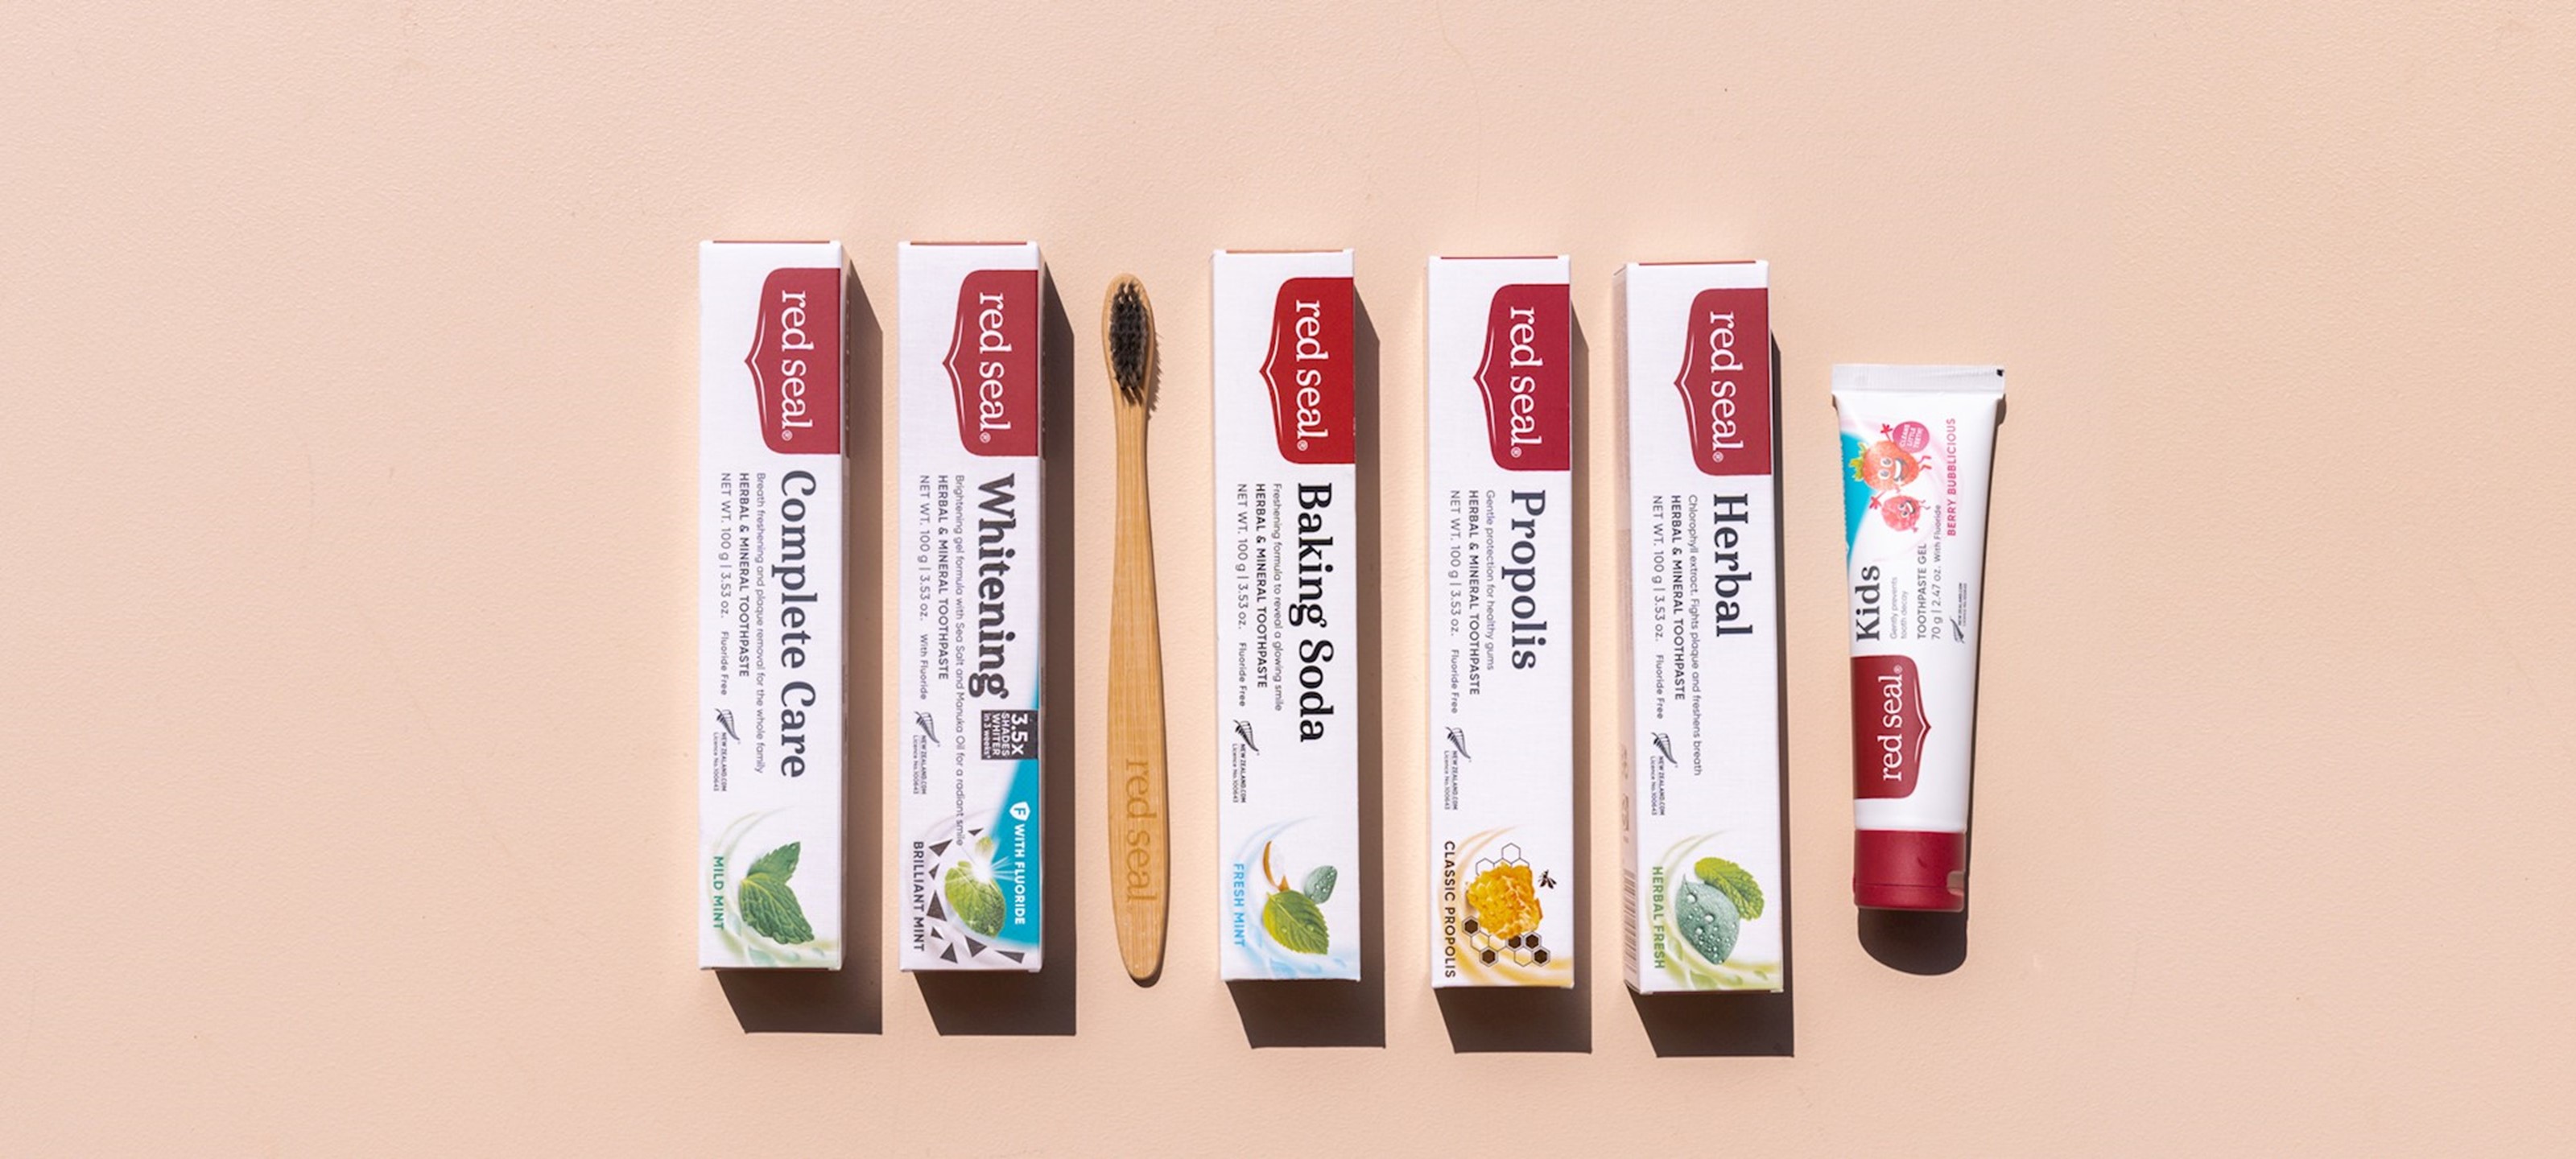 Red Seal Herbal Toothpaste New Range Transition hero image